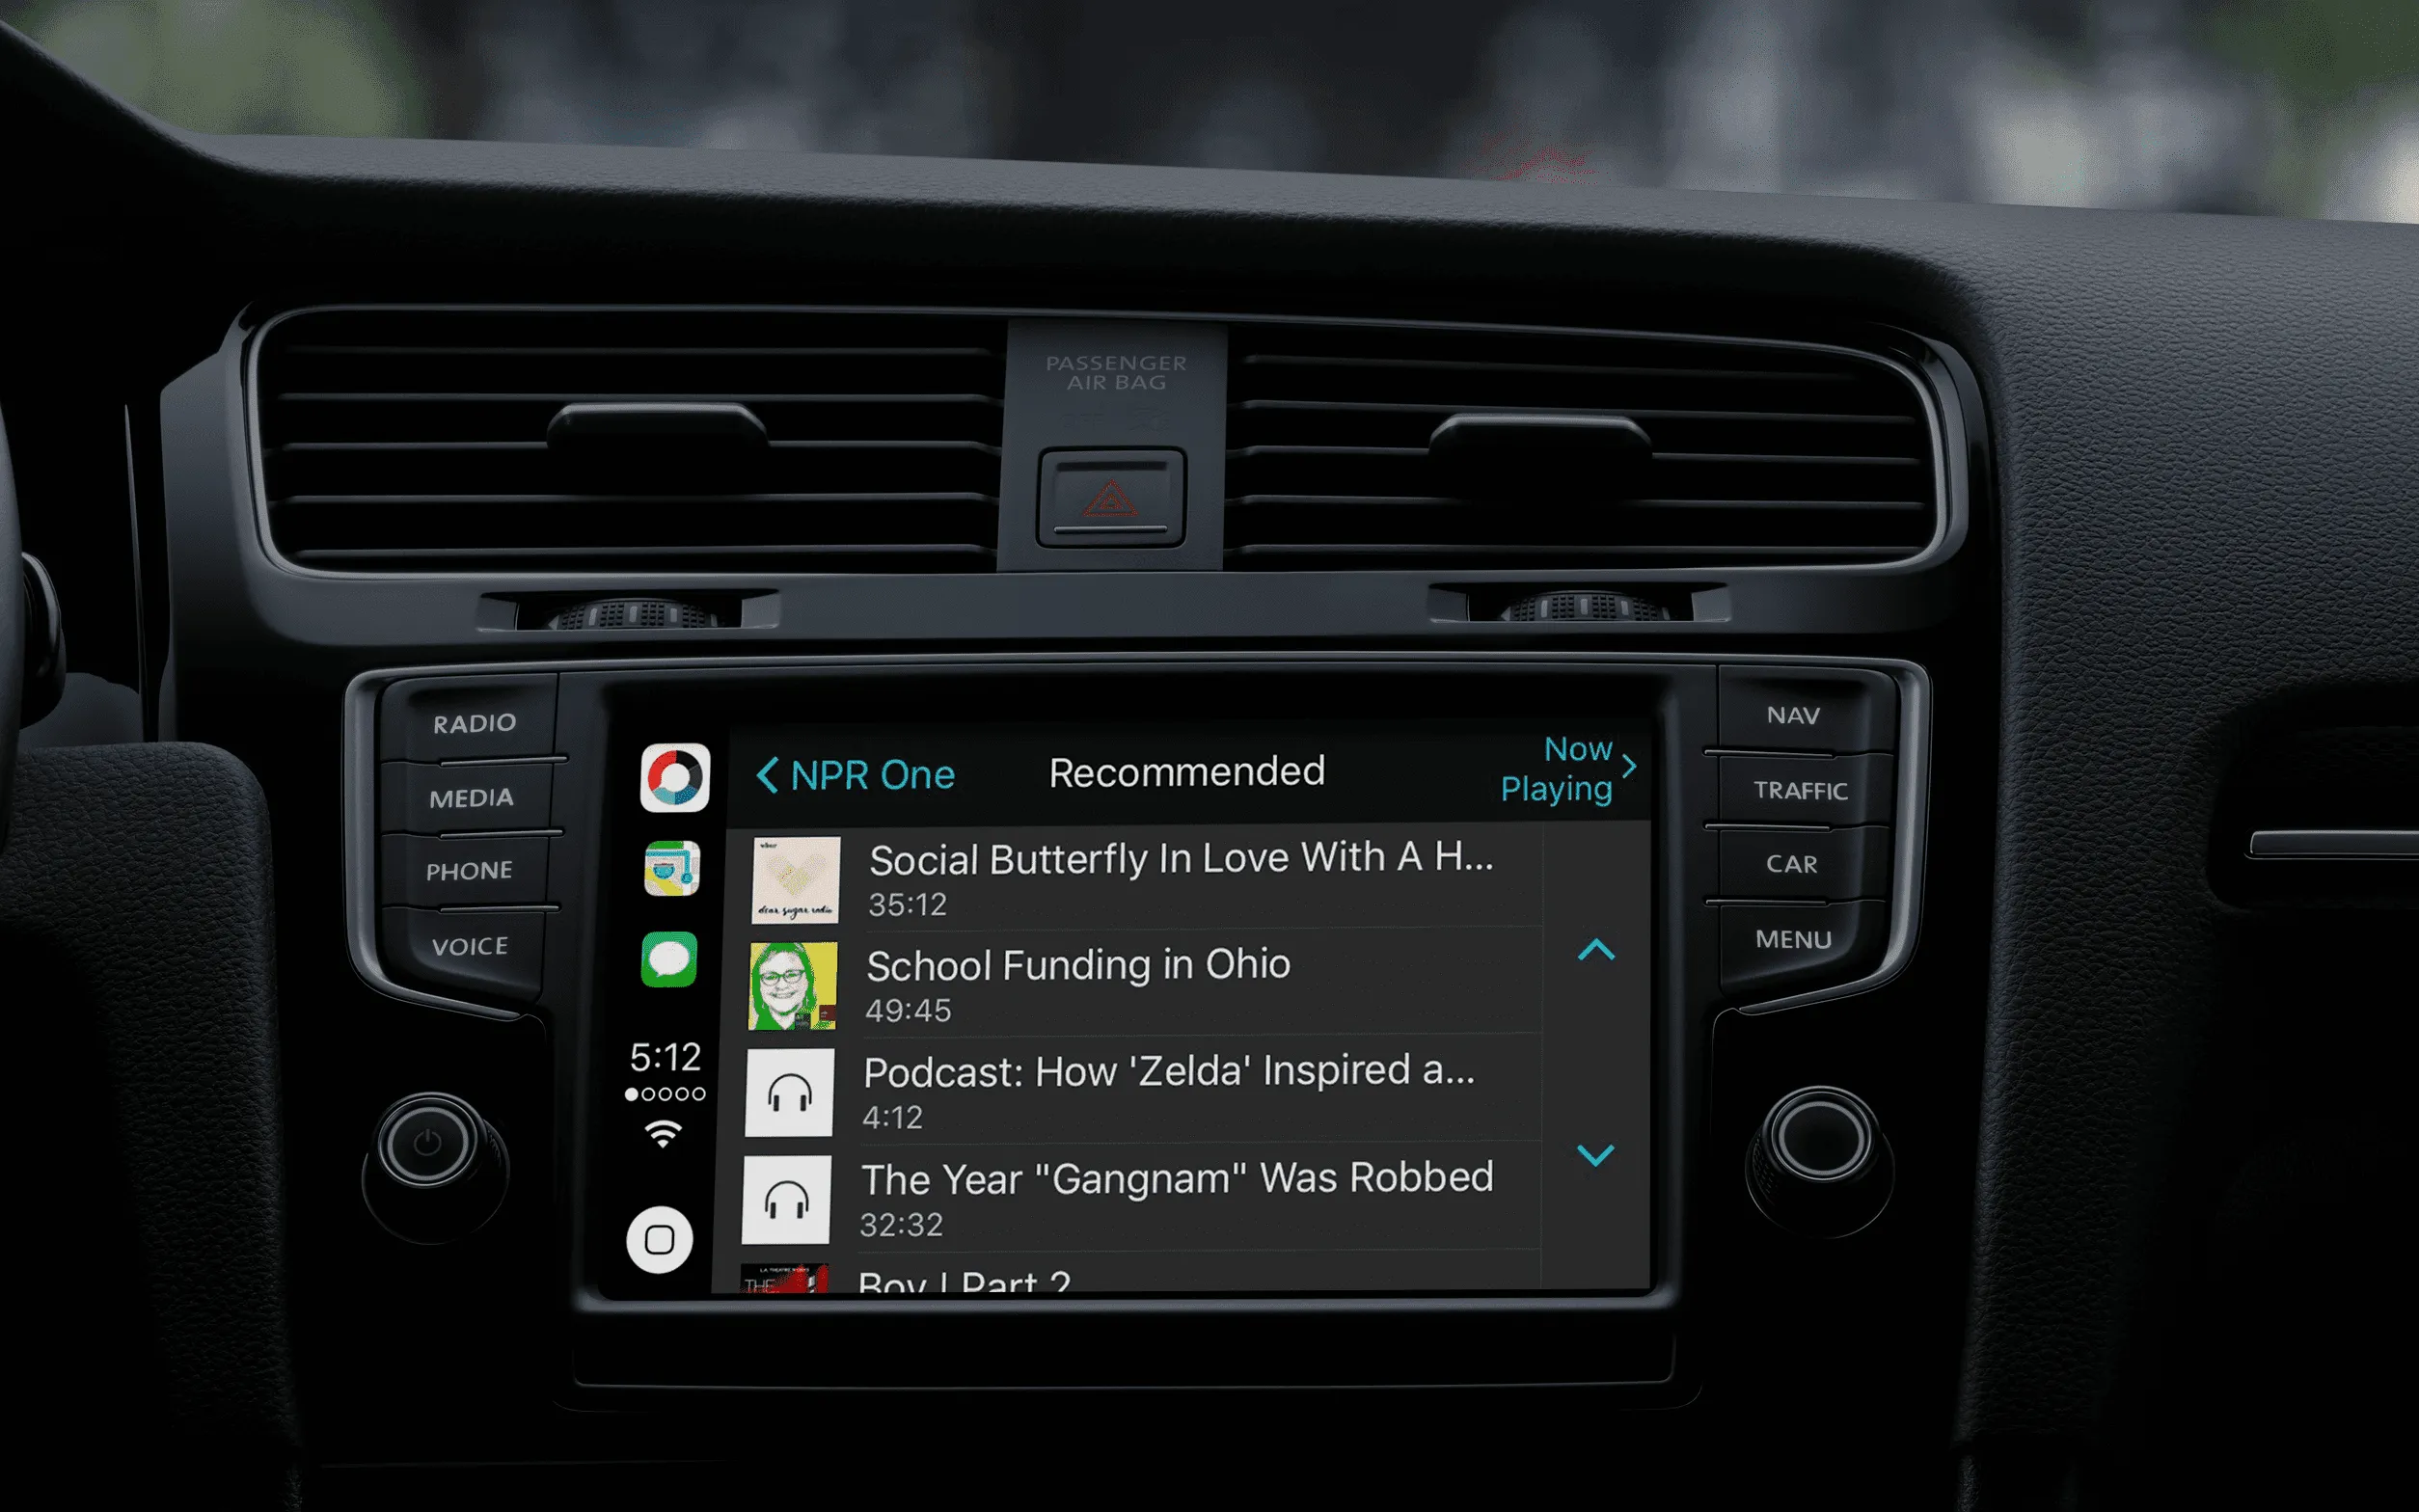 Apps supported by apple CarPlay: NRP One